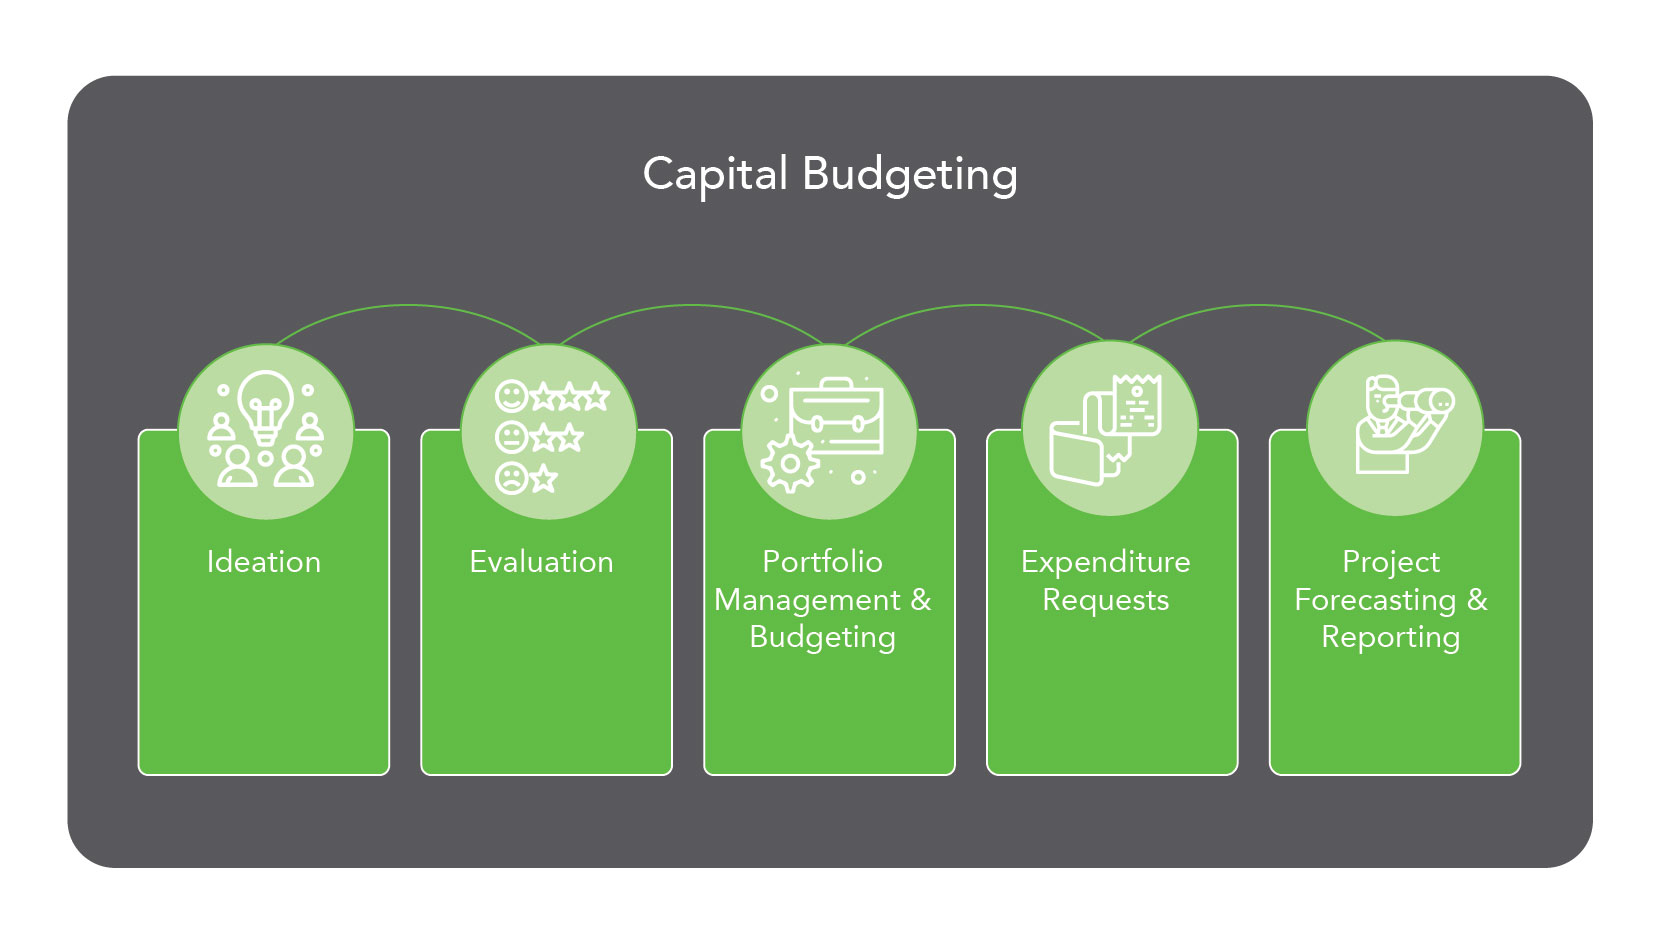 Capital Budgeting Software as a Service Stratex Online Solution Overview